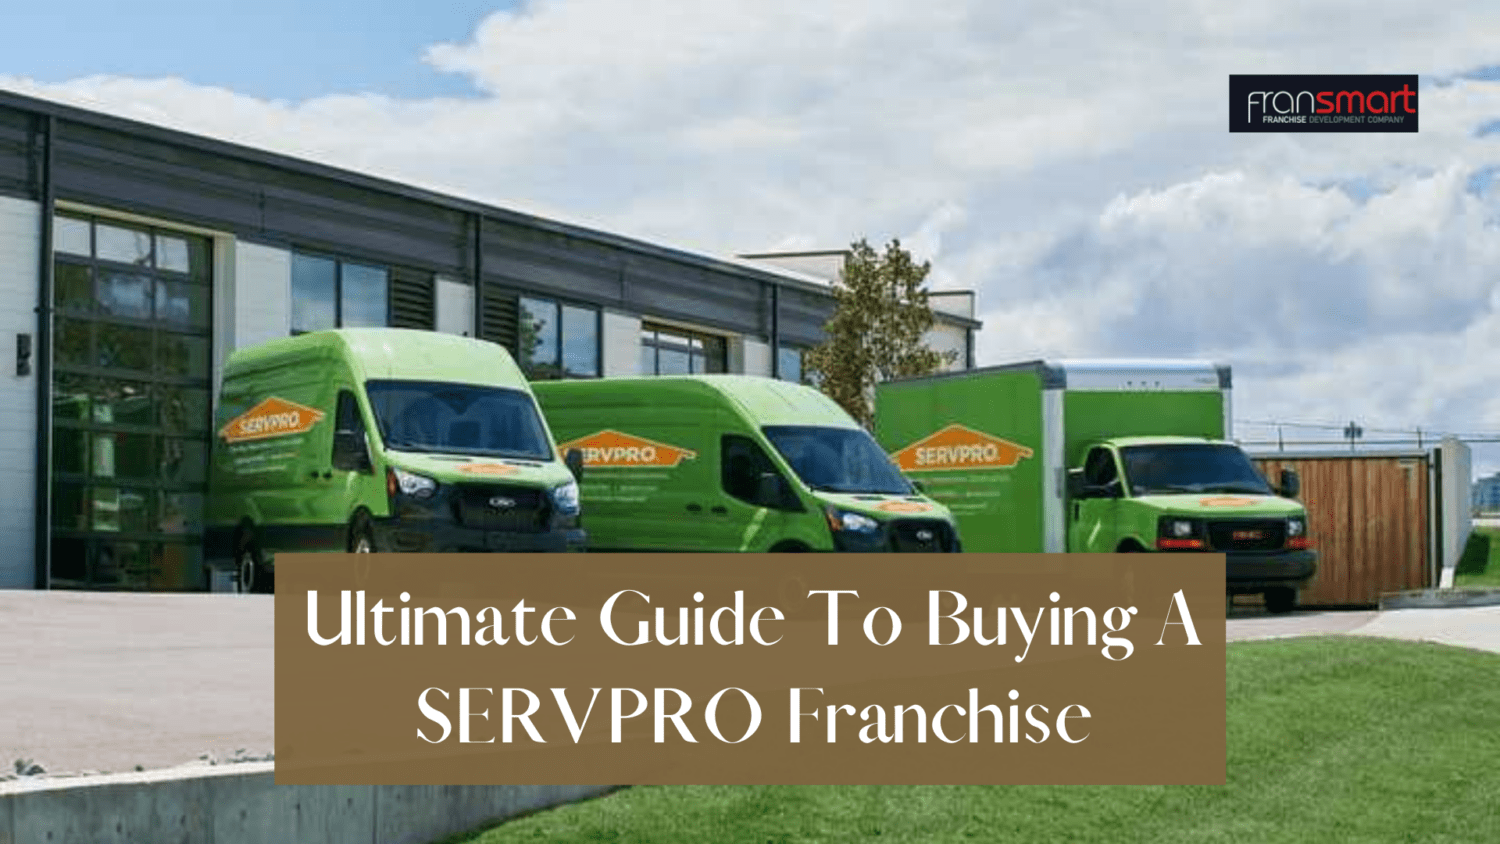 Ultimate Guide To Buying A SERVPRO Franchise